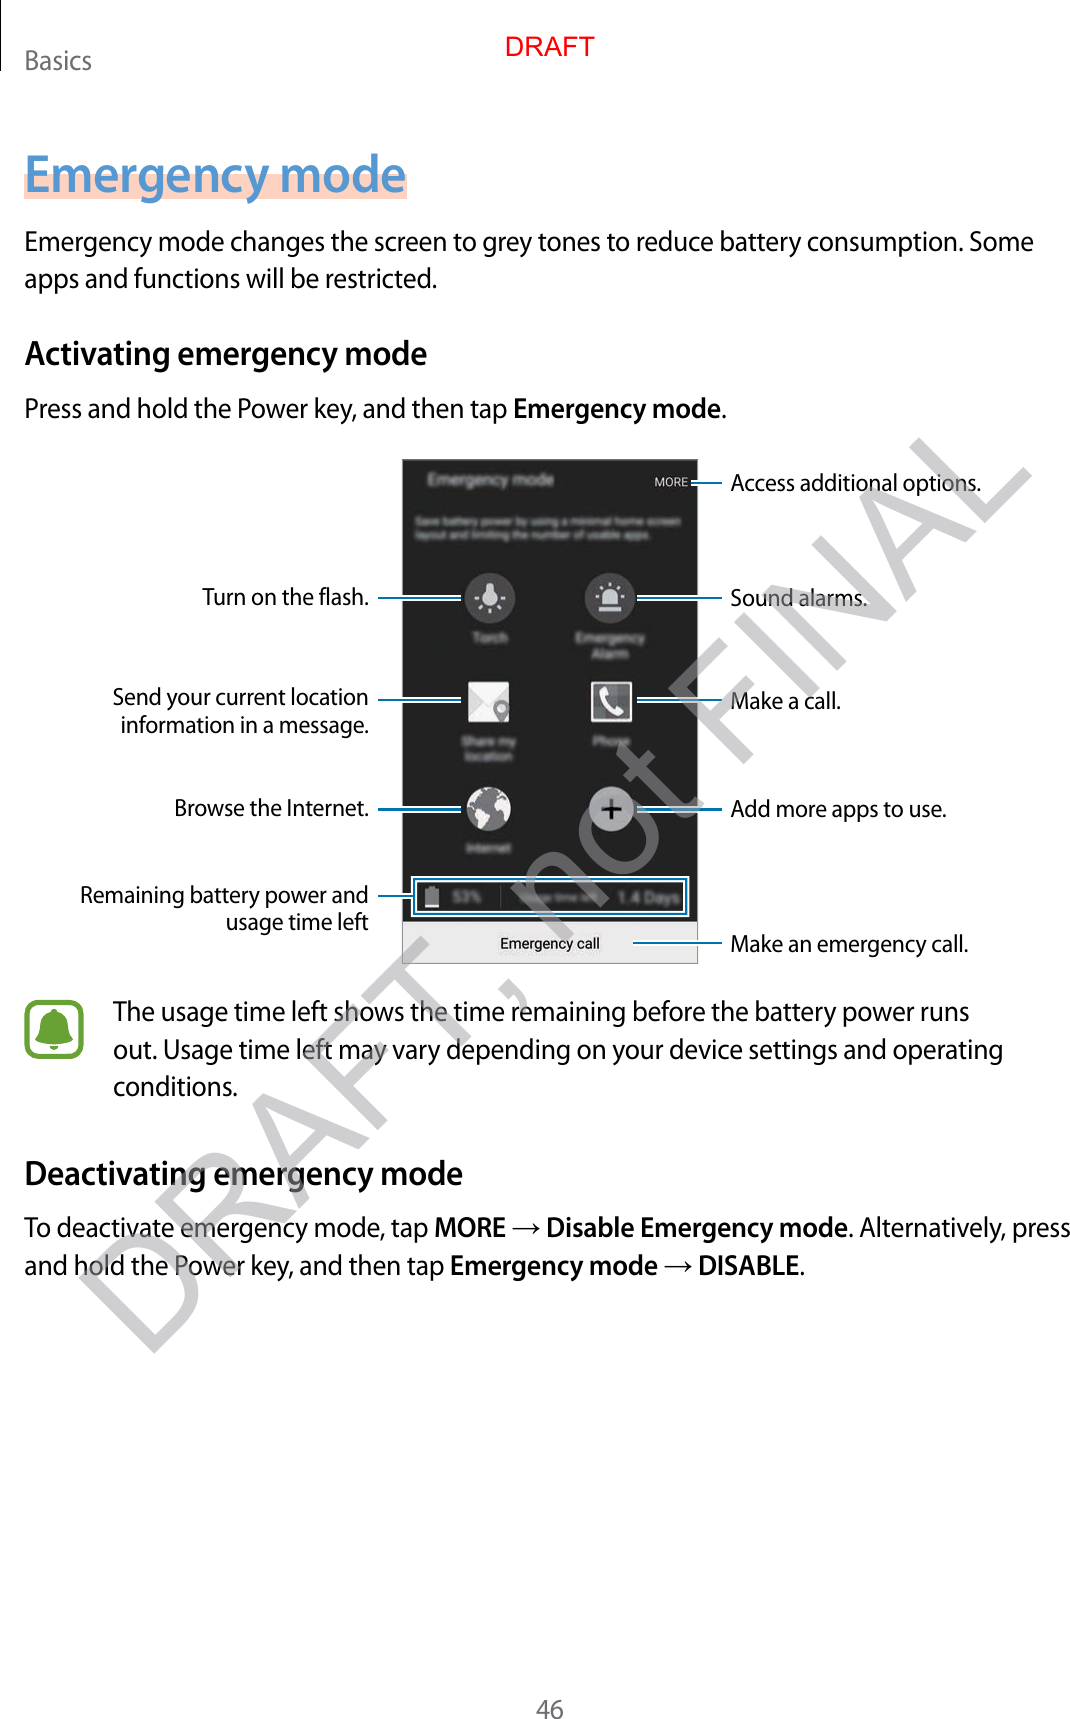 Basics46Emergency modeEmergency mode changes the screen to gr ey t ones to r educ e batt ery consumption. Some apps and functions will be restricted .Activating emer gency modePr ess and hold the Pow er key, and then tap Emergency mode.Add mor e apps to use .Make an emergency call.Remaining battery power and usage time leftTurn on the flash.Make a call.Send your current location information in a message .Brow se the Internet.Acc ess additional options .Sound alarms.The usage time left shows the time r emaining bef or e the batt ery power runs out. Usage time left may vary depending on your device settings and operating conditions.Deactiva ting emer gency modeTo deactivate emergency mode, tap MORE → Disable Emergency mode. Alternativ ely, pr ess and hold the P o w er key, and then tap Emergency mode → DISABLE.DRAFTDRAFT, not FINAL